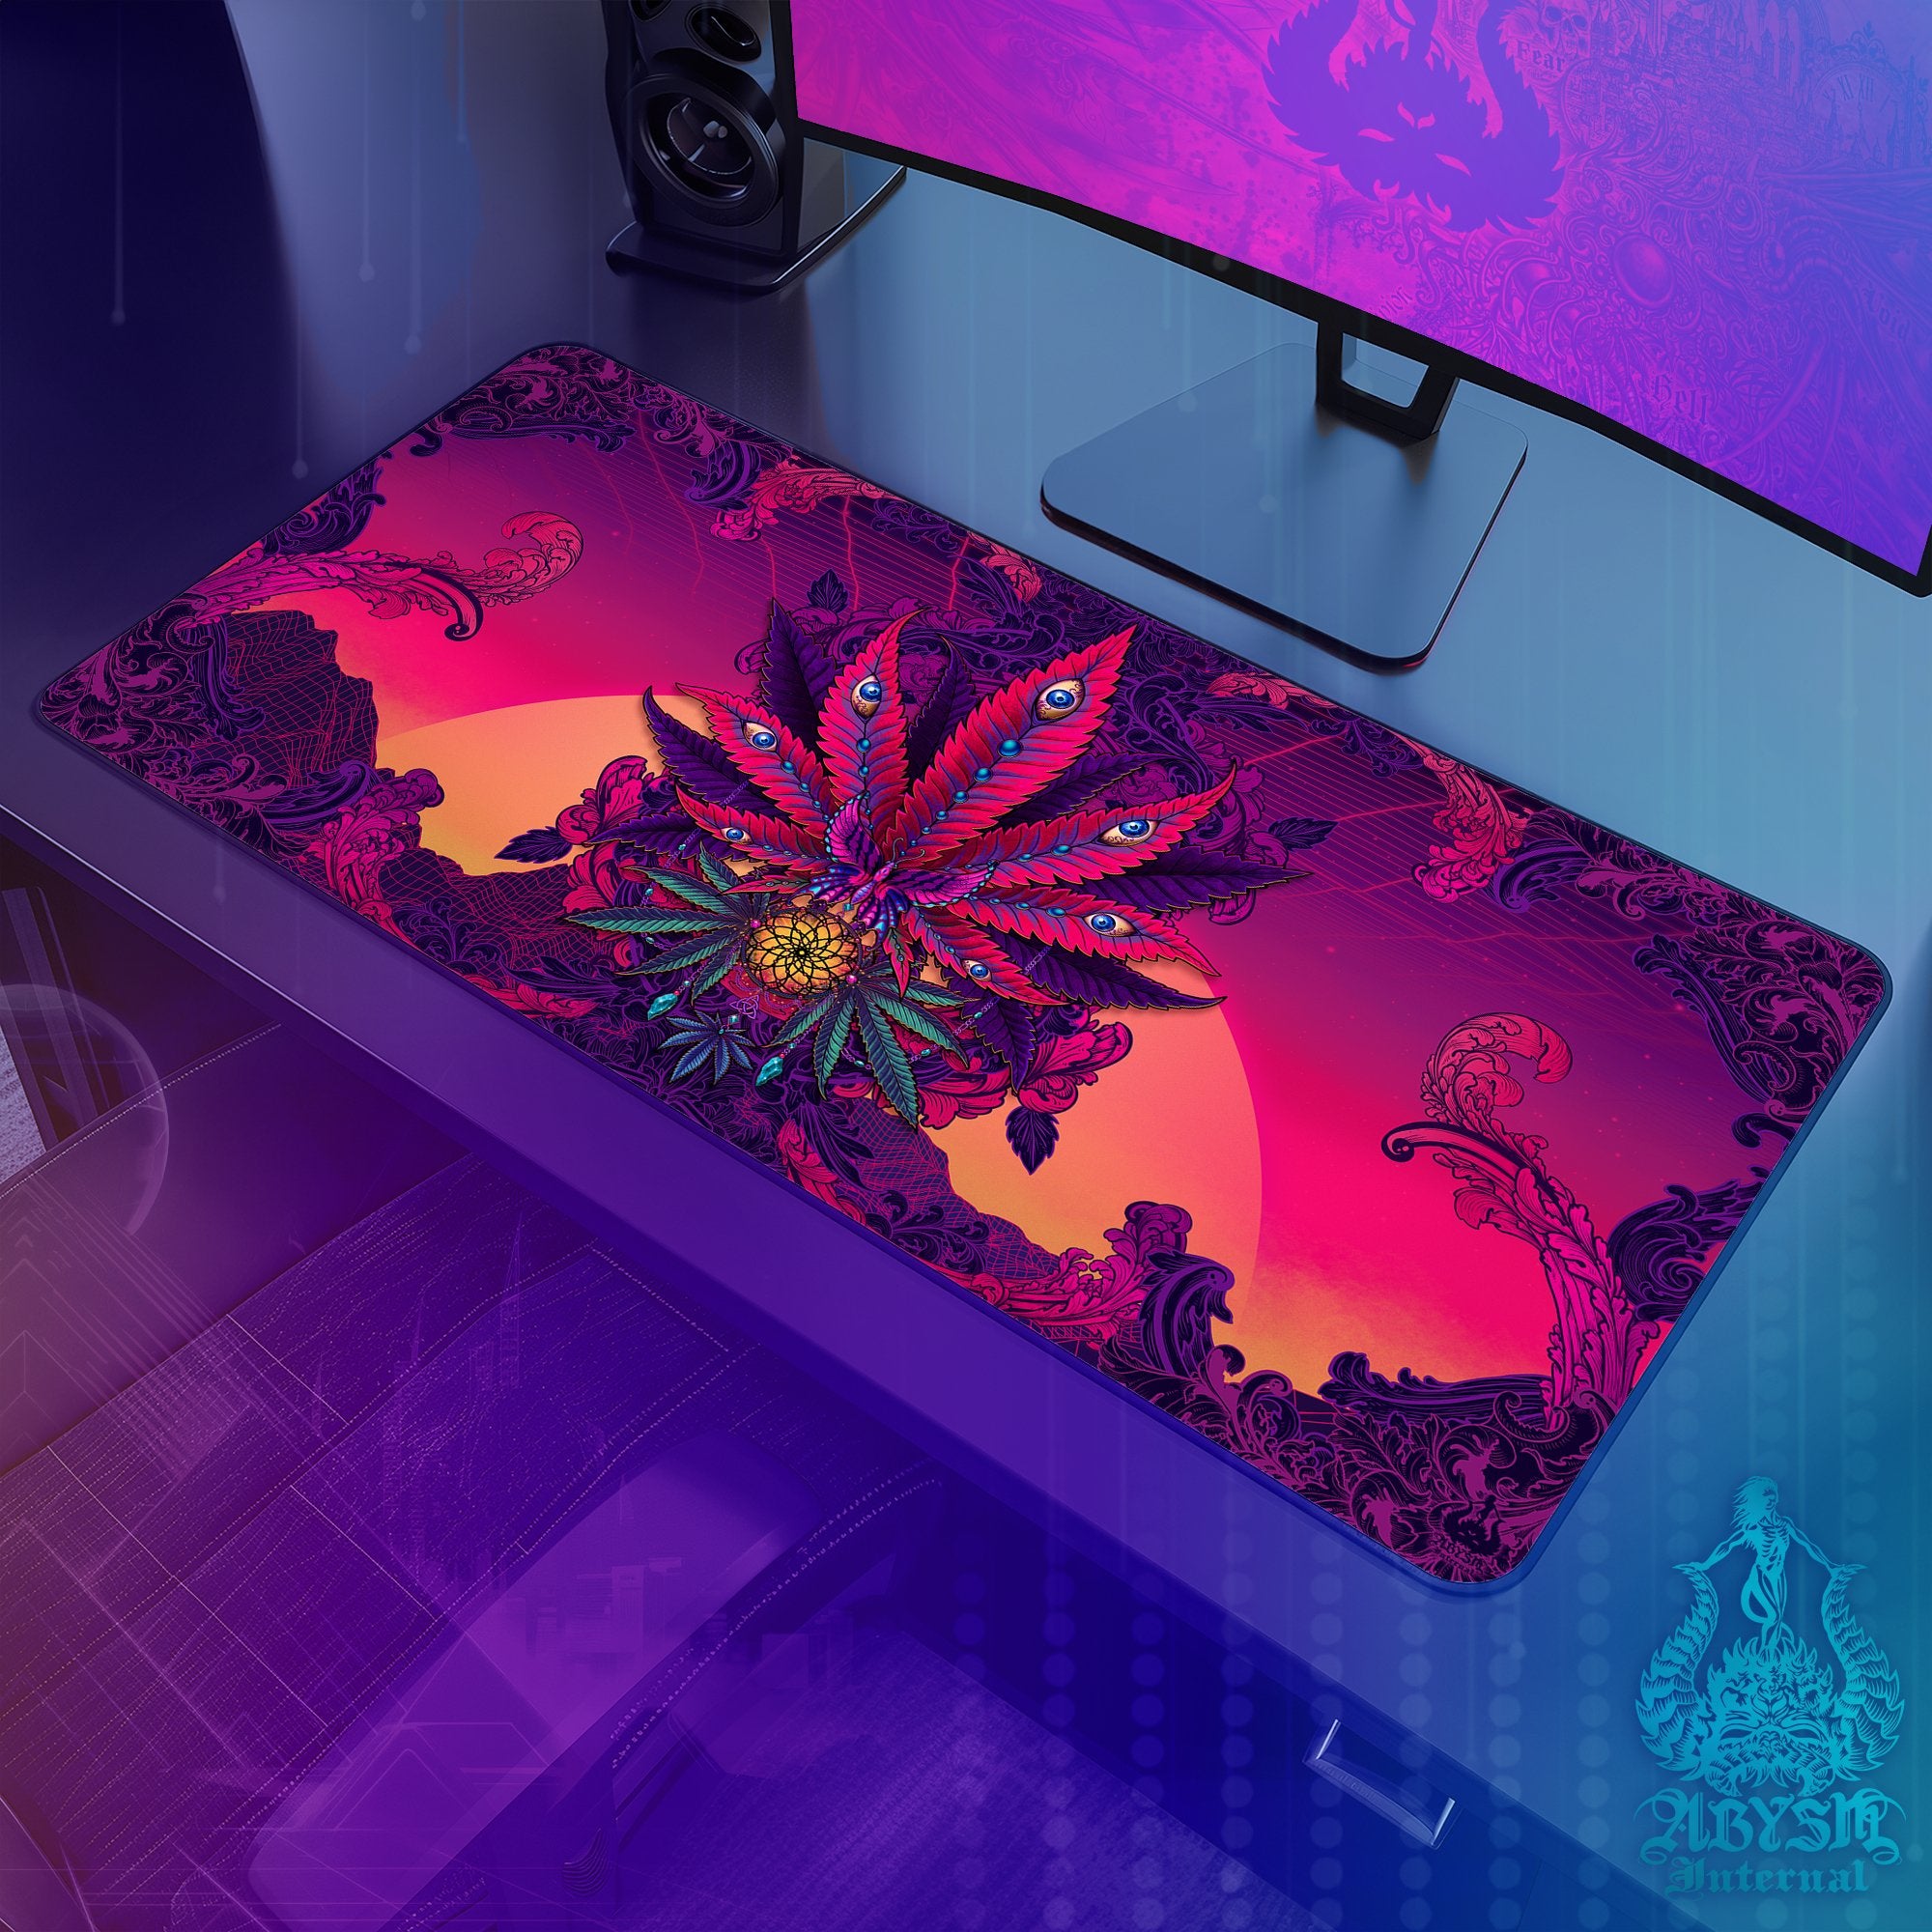 Psychedelic Gaming Mouse Pad, Marijuana Desk Mat, Weed Table Protector Cover, Retrowave Cannabis Workpad, Vaporwave 420 Art Print - Abysm Internal